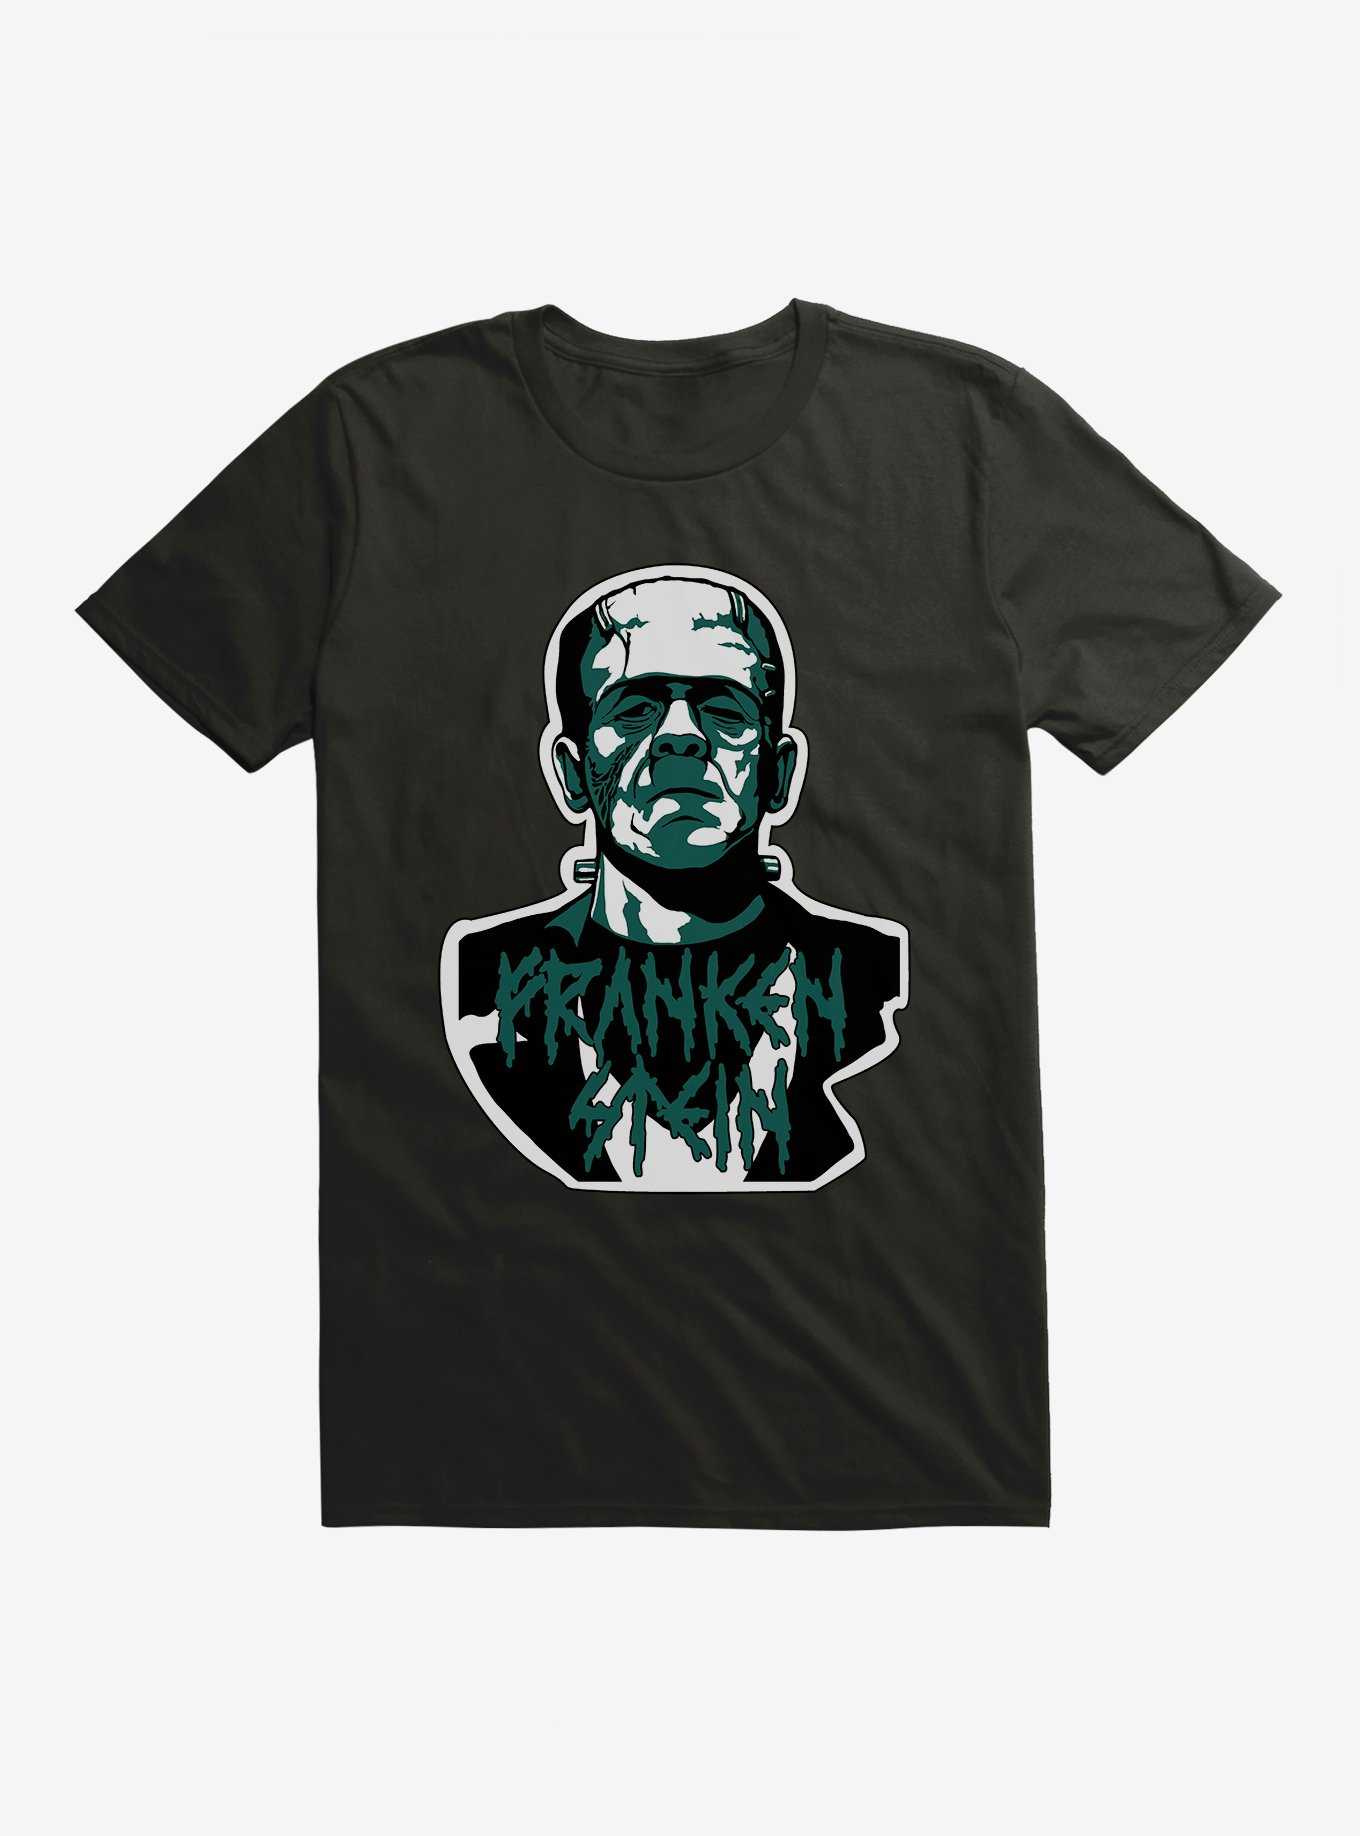 Universal Monsters Frankenstein Classic Bolts T-Shirt, , hi-res